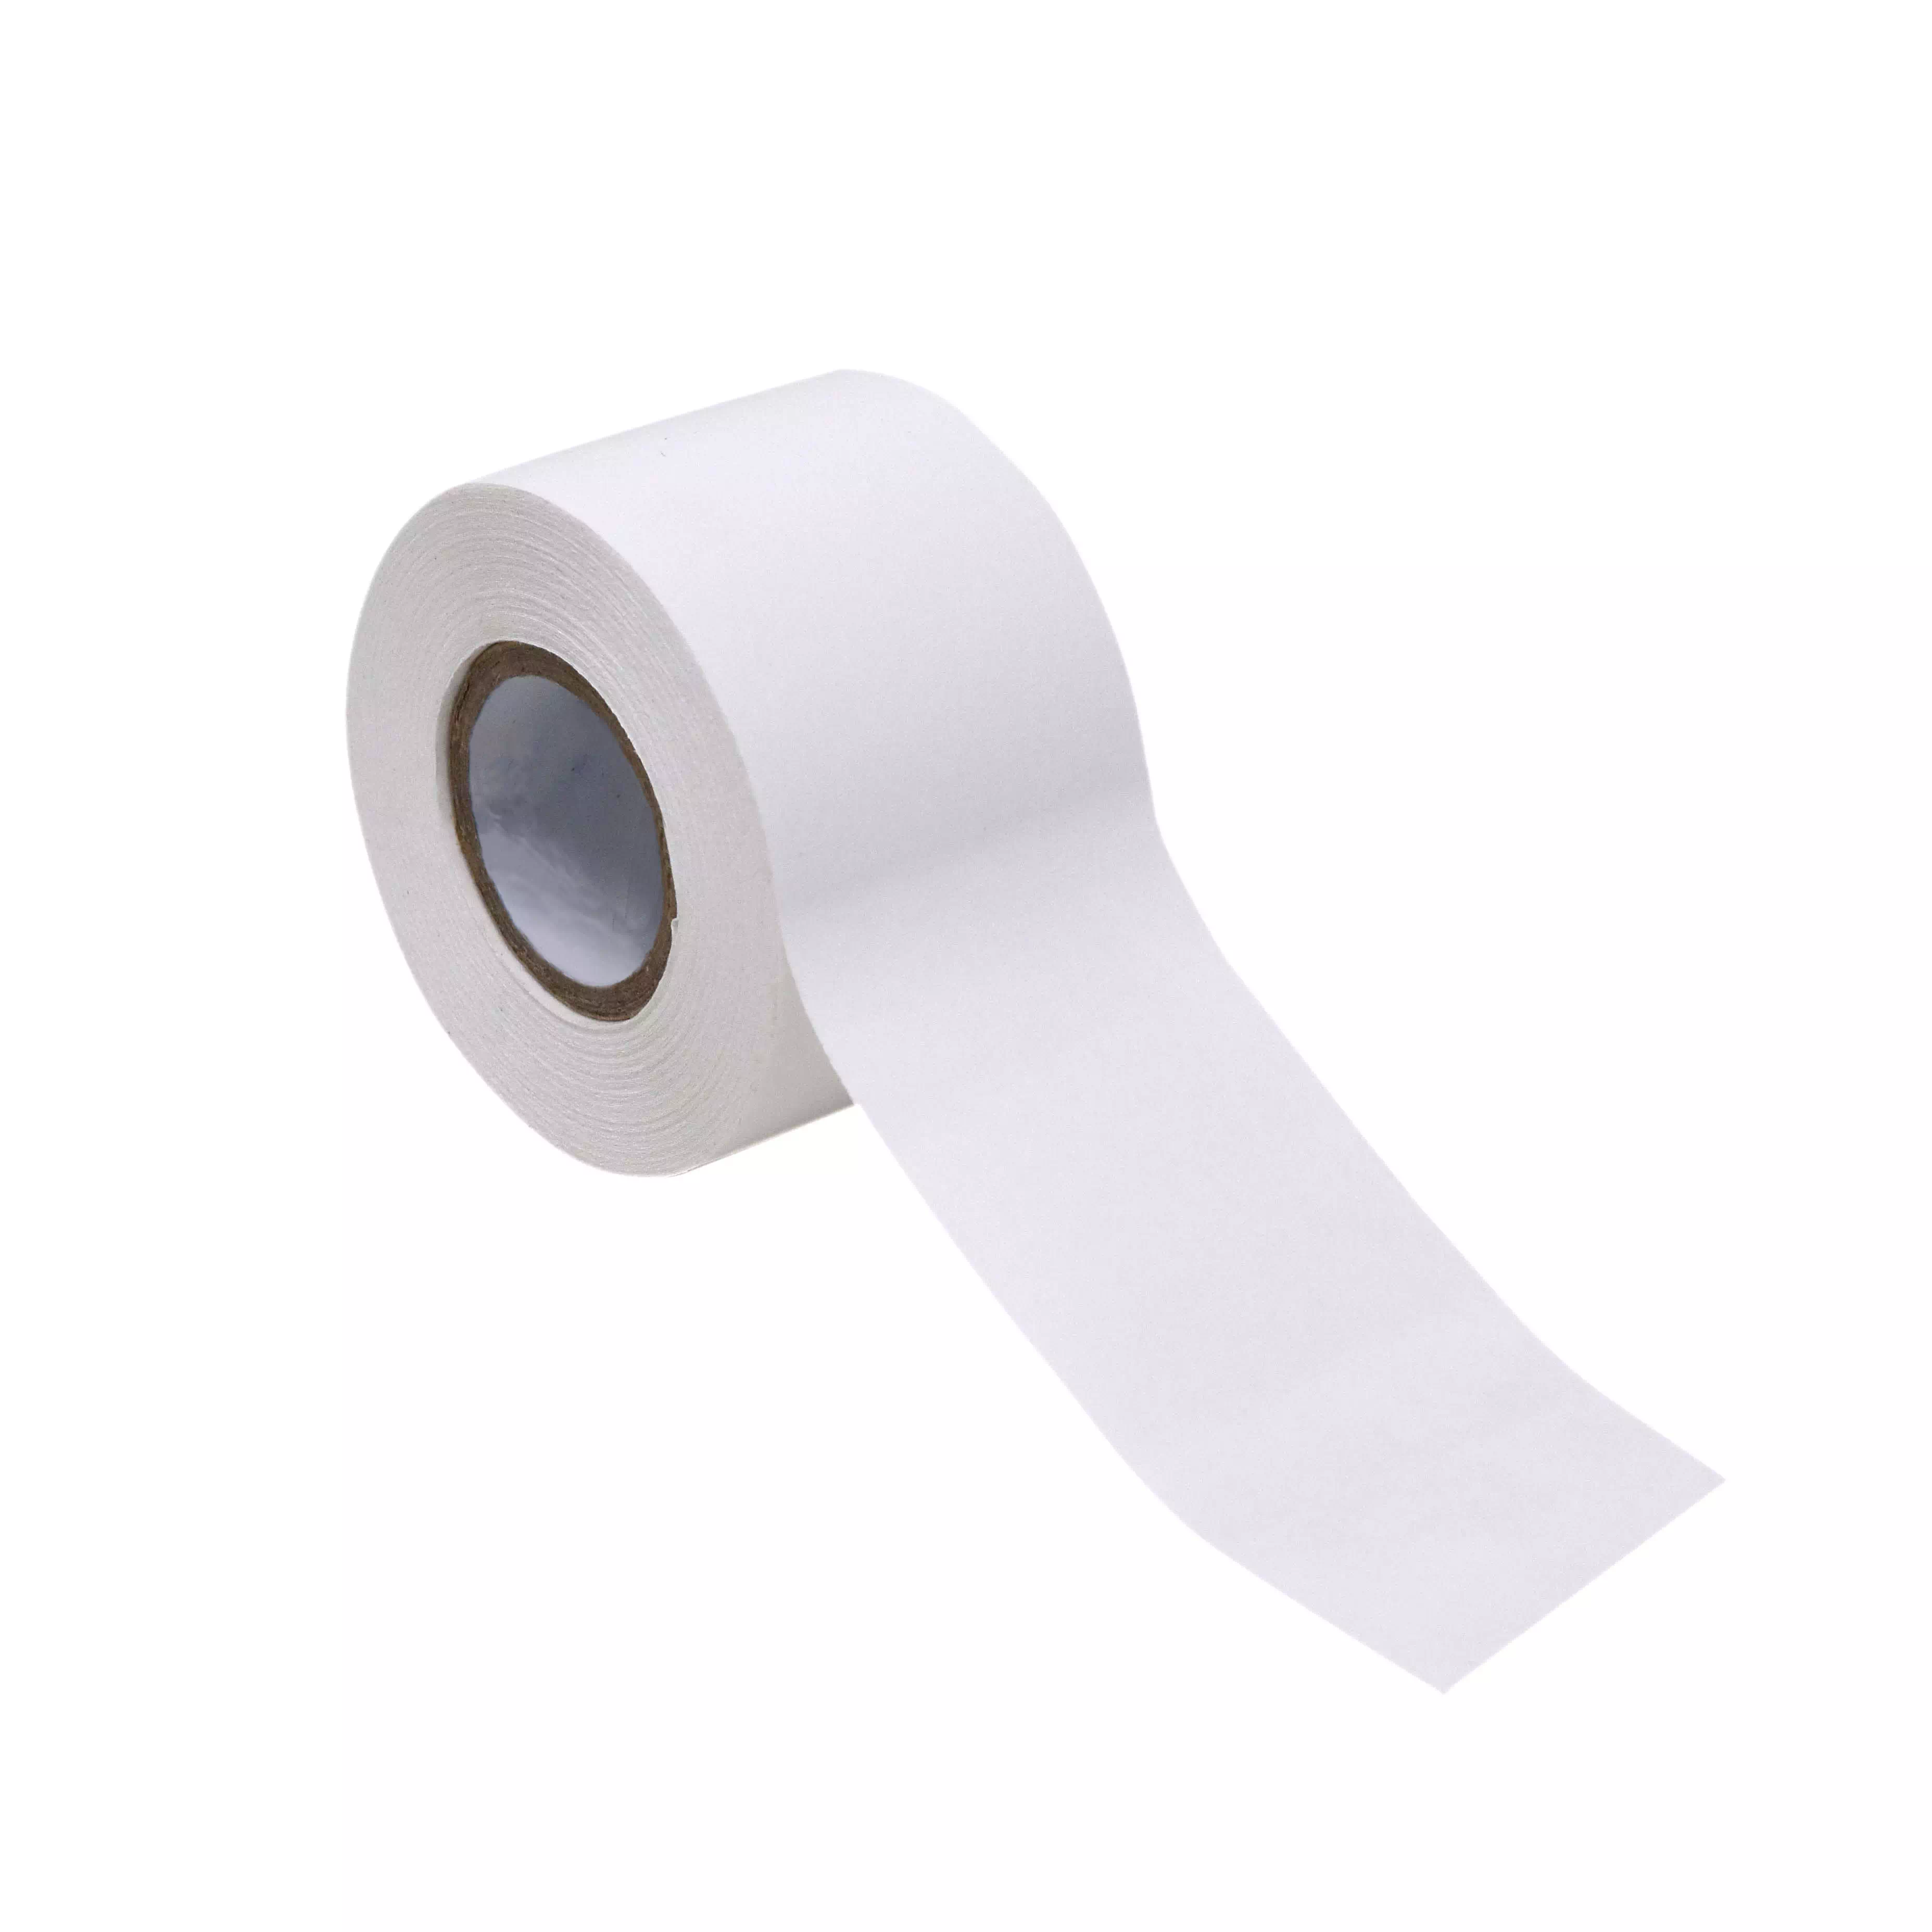 1-1/2" wide x 500" White Labeling Tape